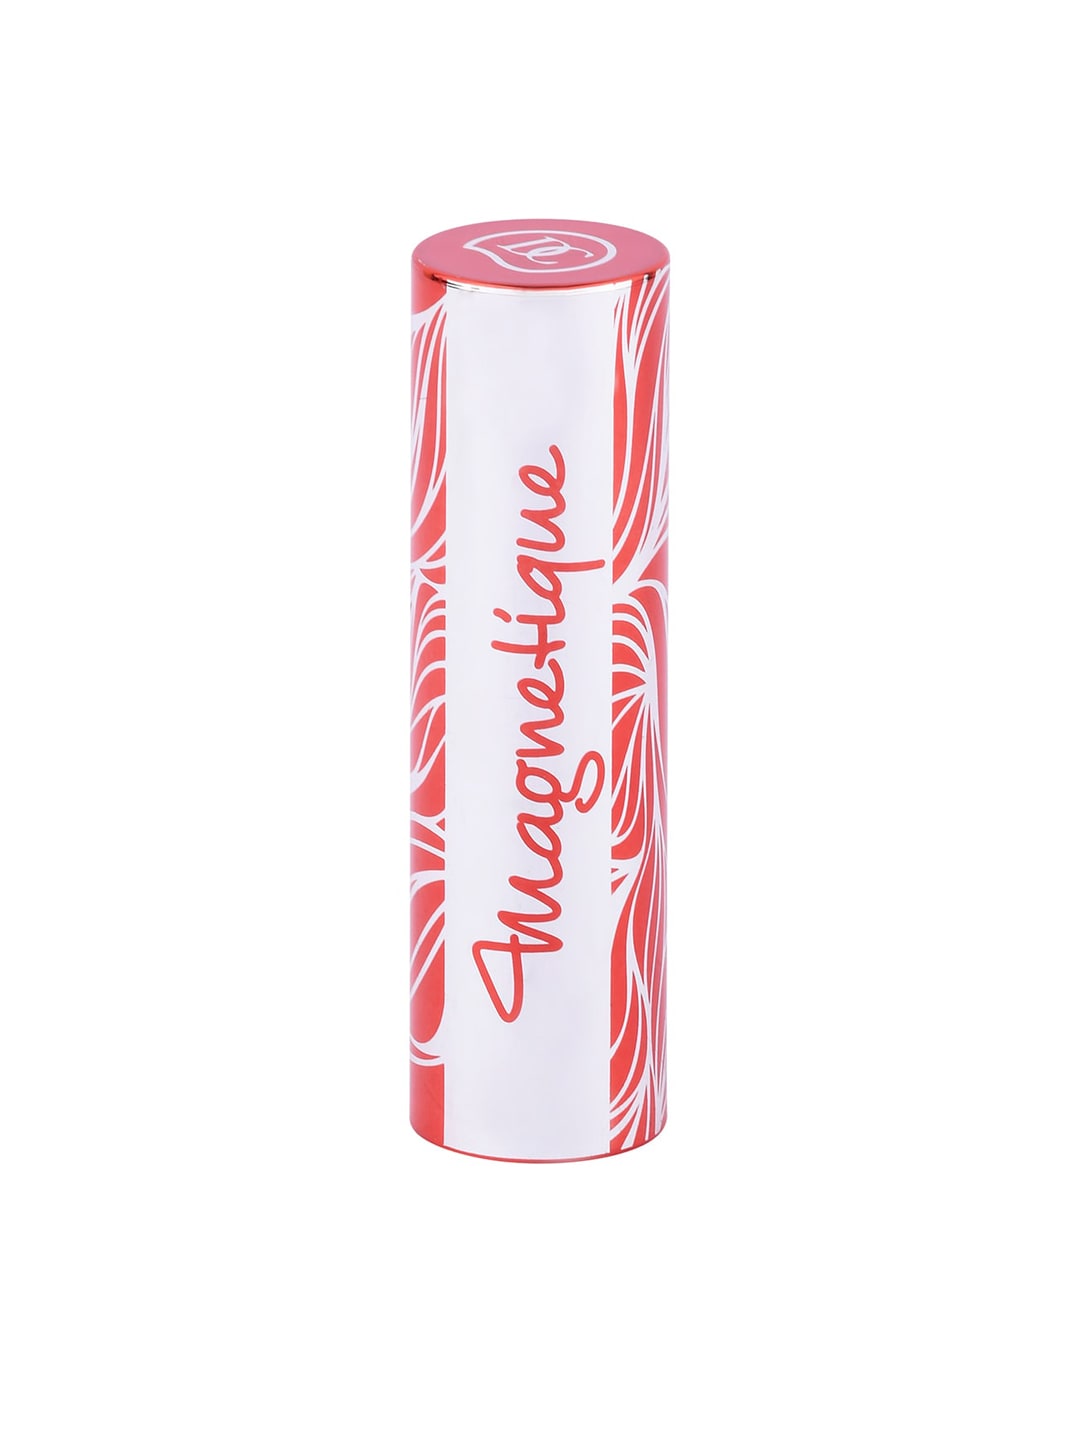 Dermacol Pink 2192 No.8 Magnetique Bullet Lipstick Price in India